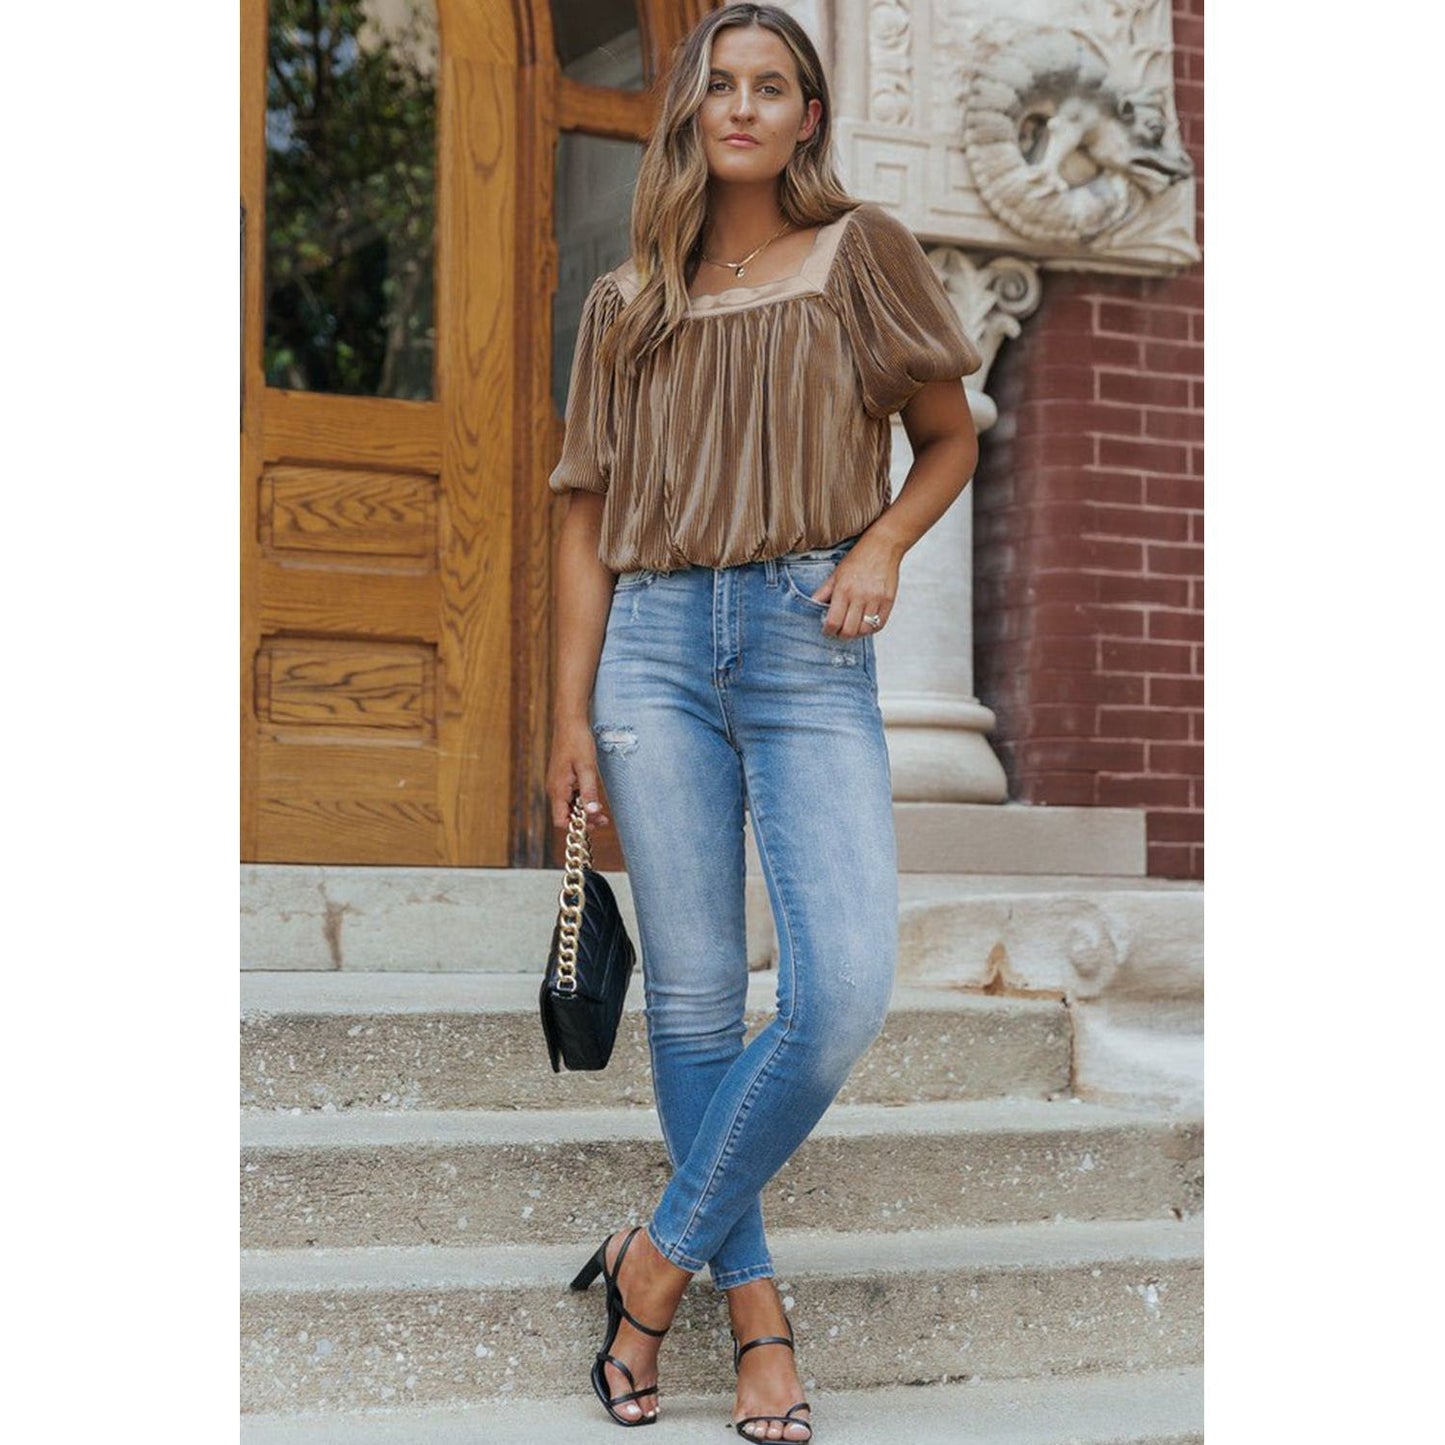 Simply Taupe Pleated Puff Sleeve Square Neck Blouse